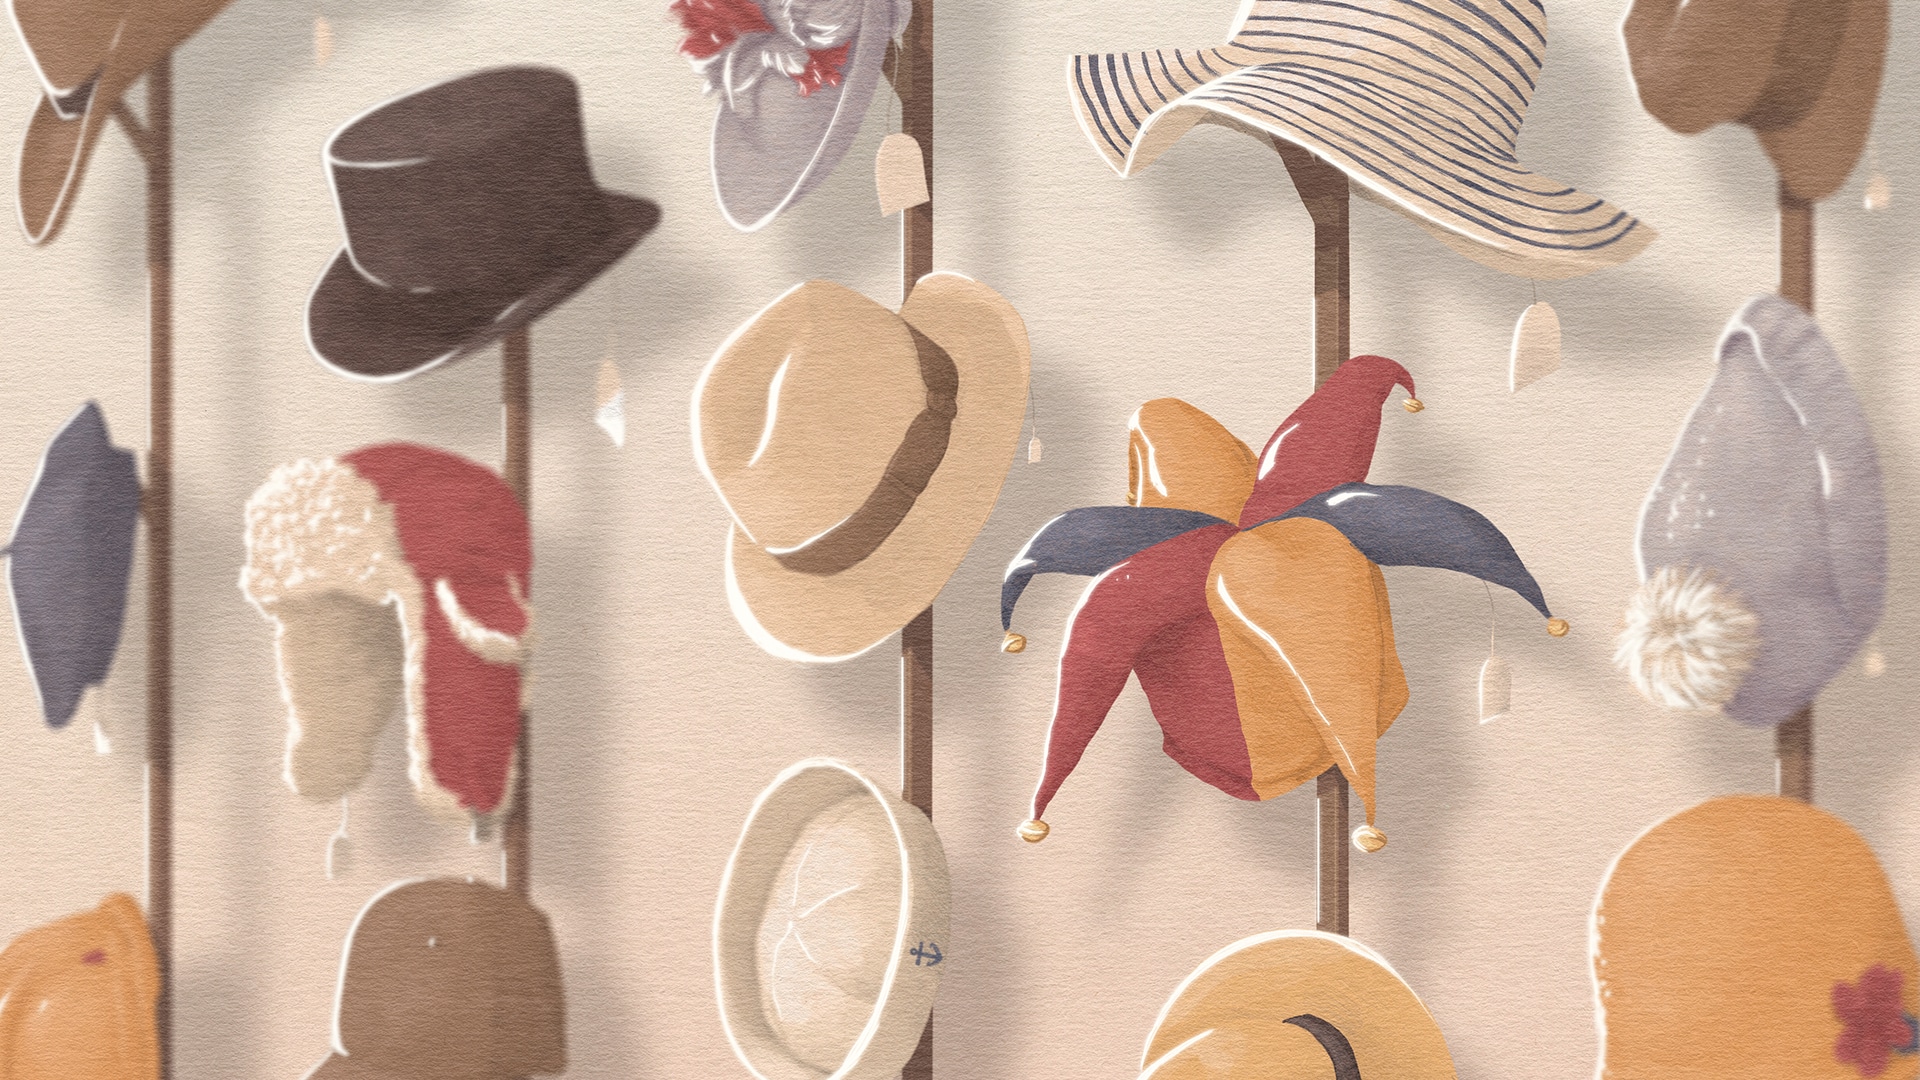 Illustration of various styles of hats, with different sizes of prices tags hanging from them.